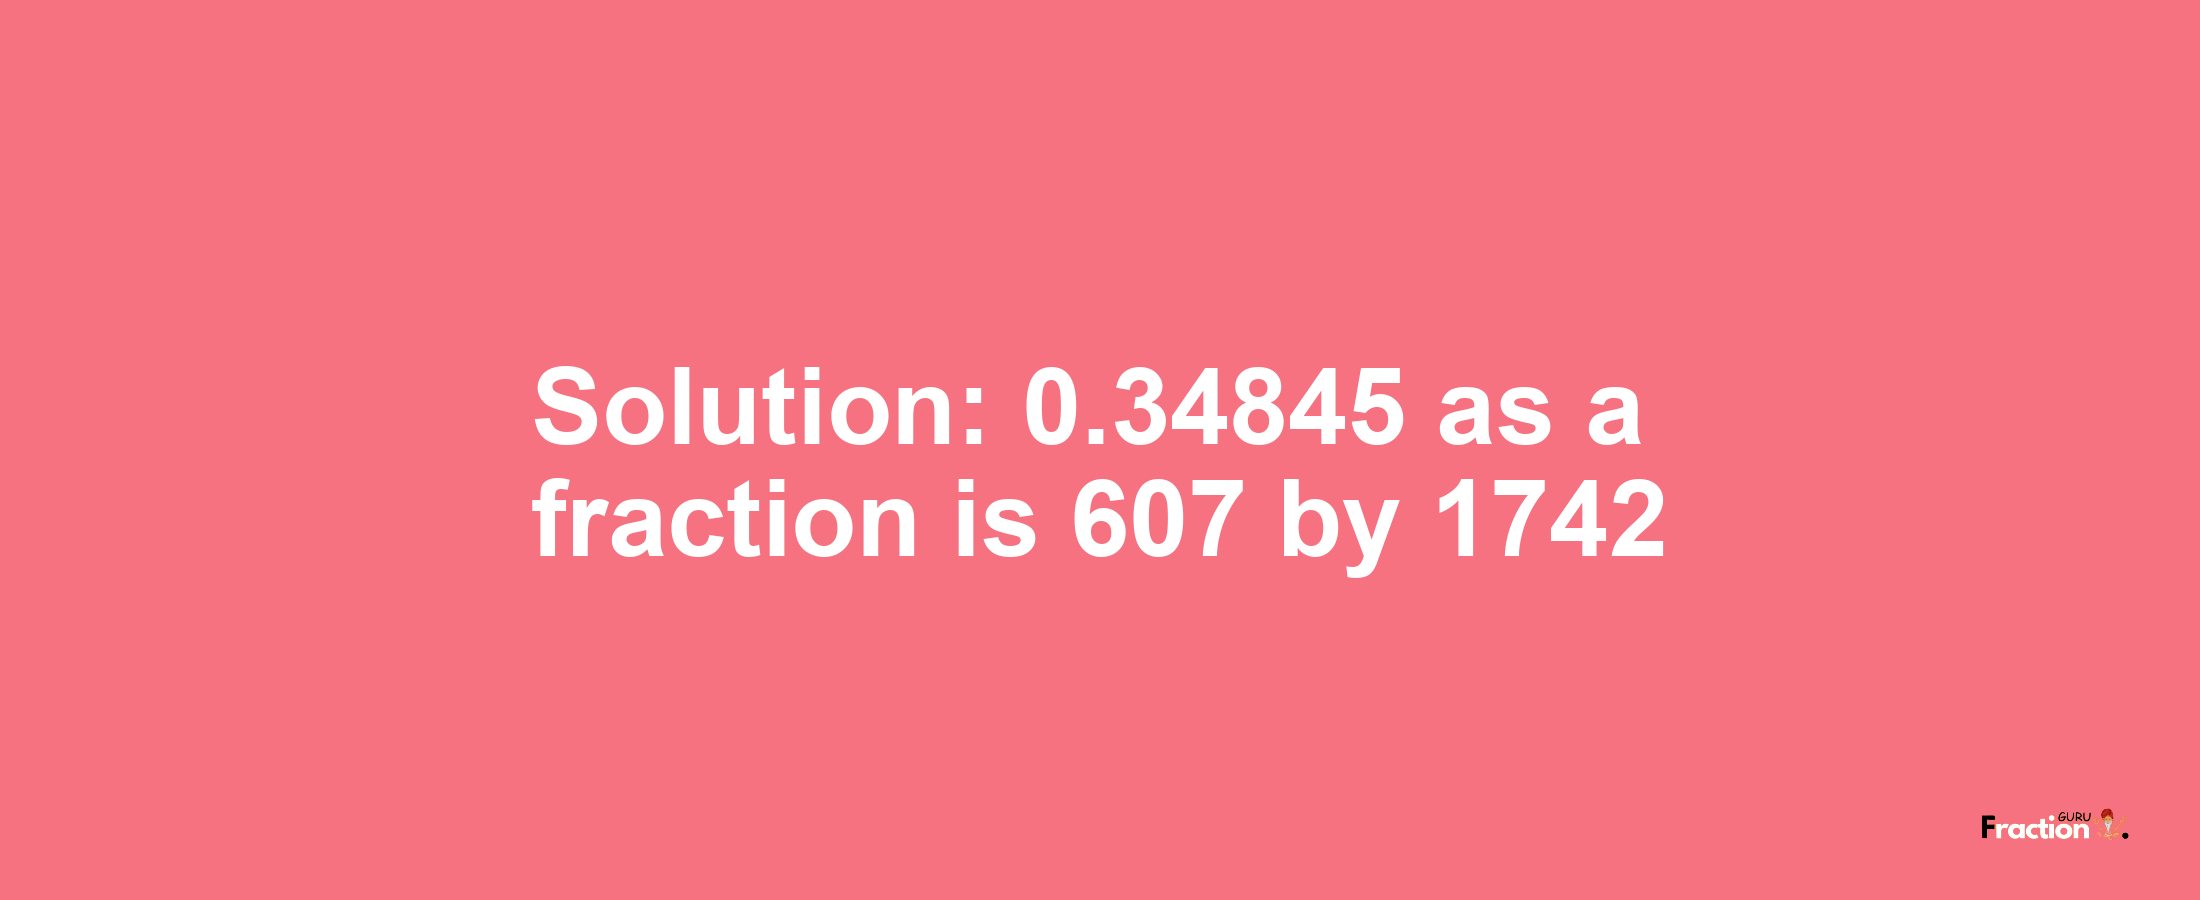 Solution:0.34845 as a fraction is 607/1742